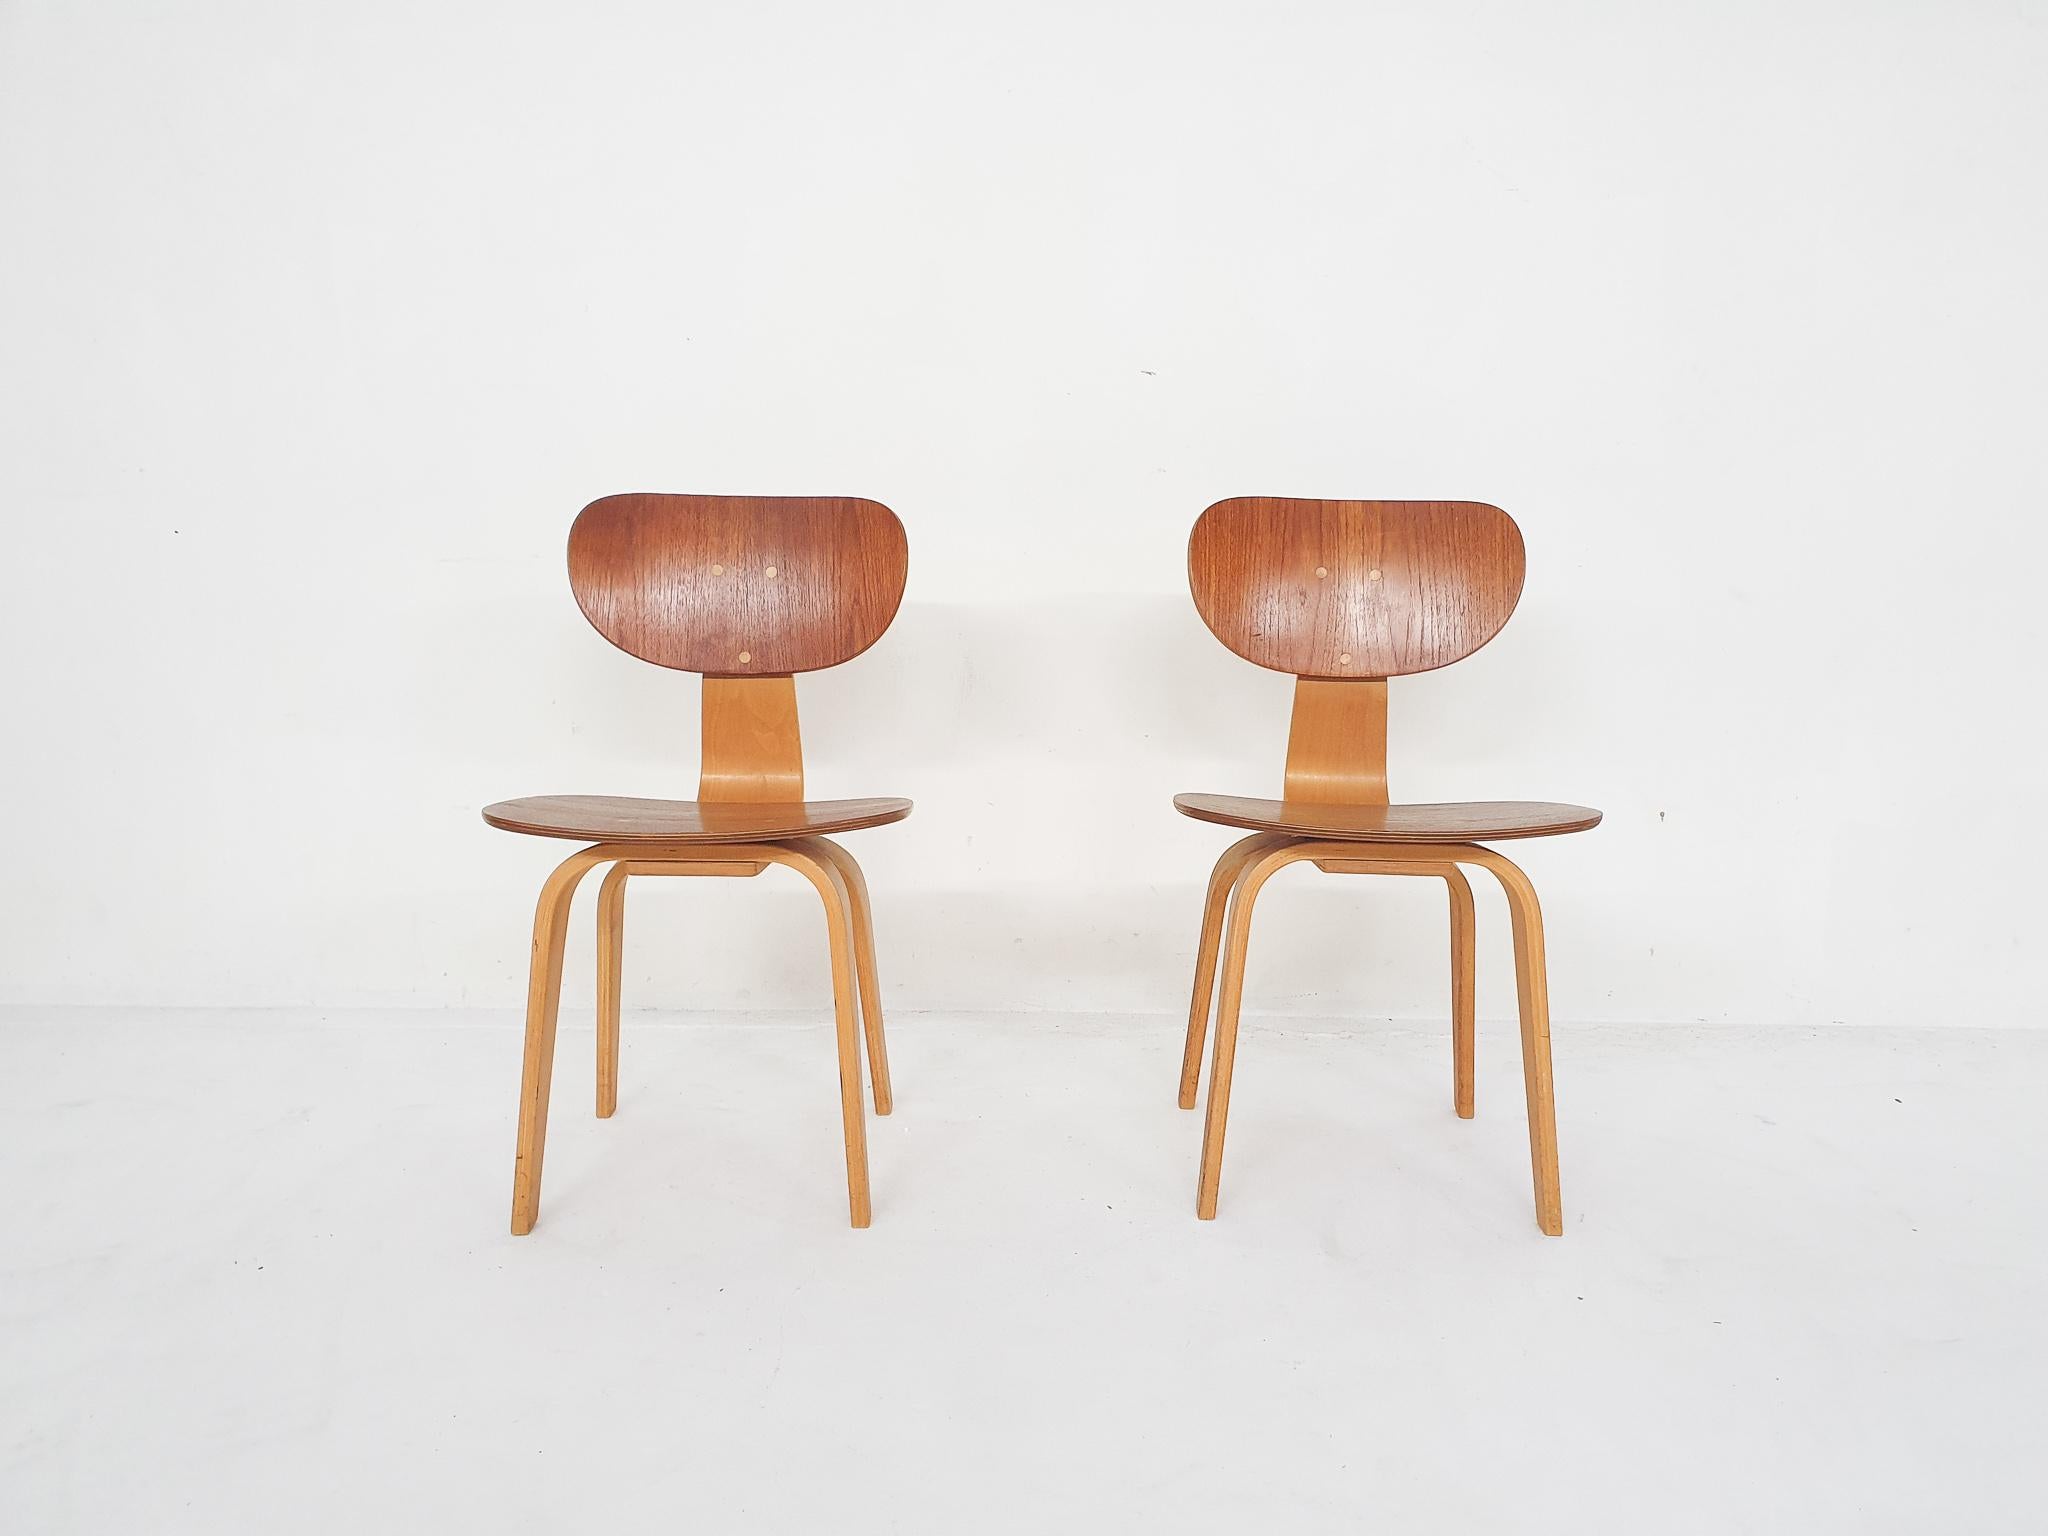 Two plywood dining chairs by Cees Braakman for Pastoe.
One chair has some veneer damage at the back of the back rest.

Cees Braakman
Cees Braakman was a Dutch furniture designer who worked for UMS Pastoe in the midcentury. He designed many beautiful